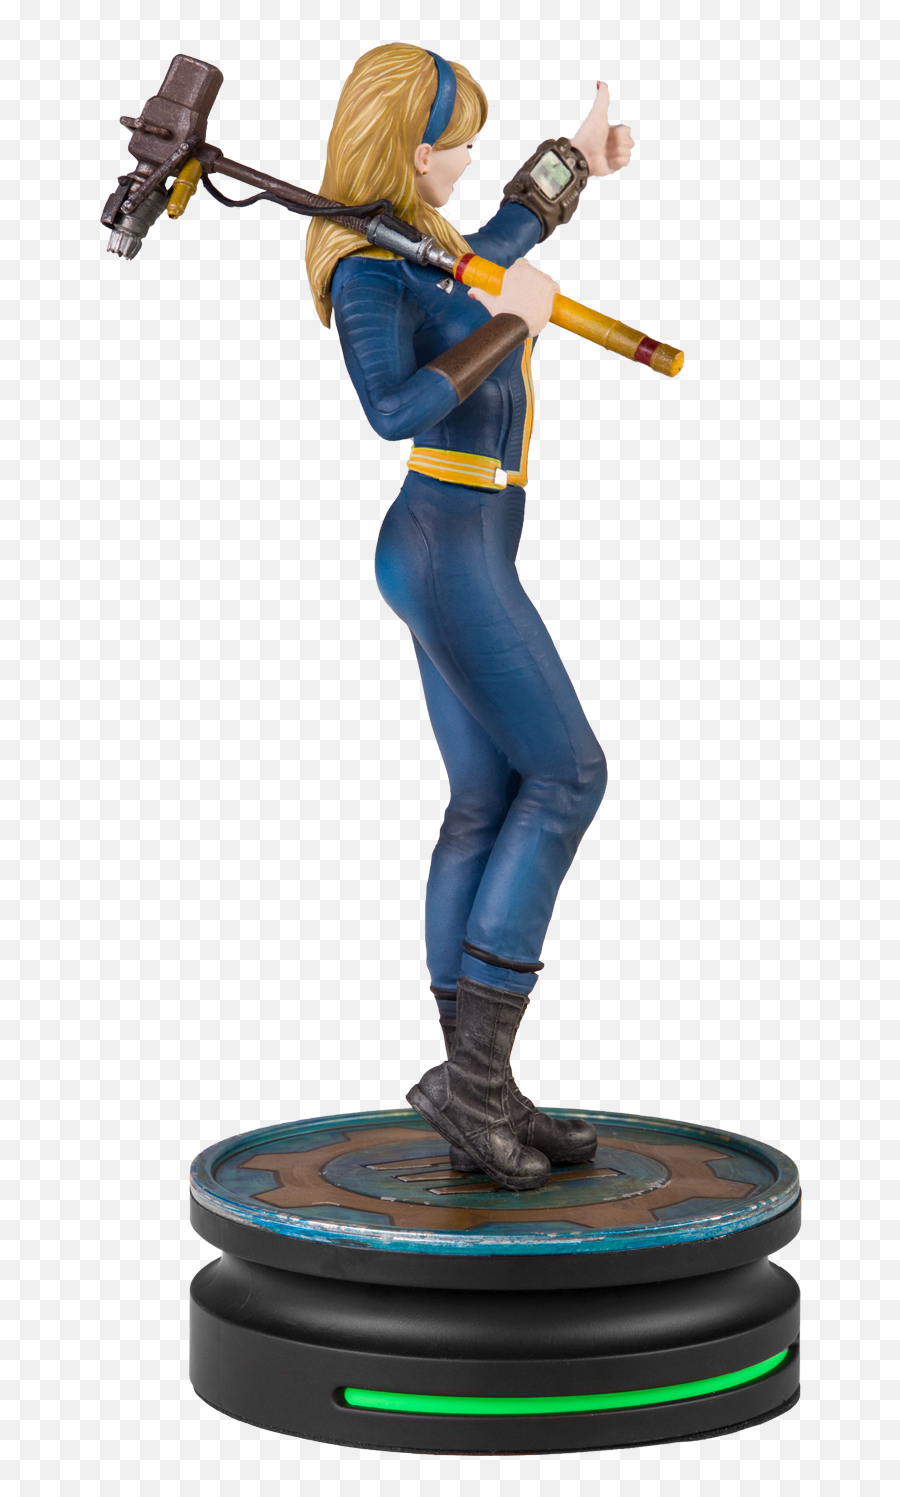 Action Figures Tv Movie U0026 Video Games Fallout Vault Girl Emoji,Fallout Use Of Emoticons In Terminals